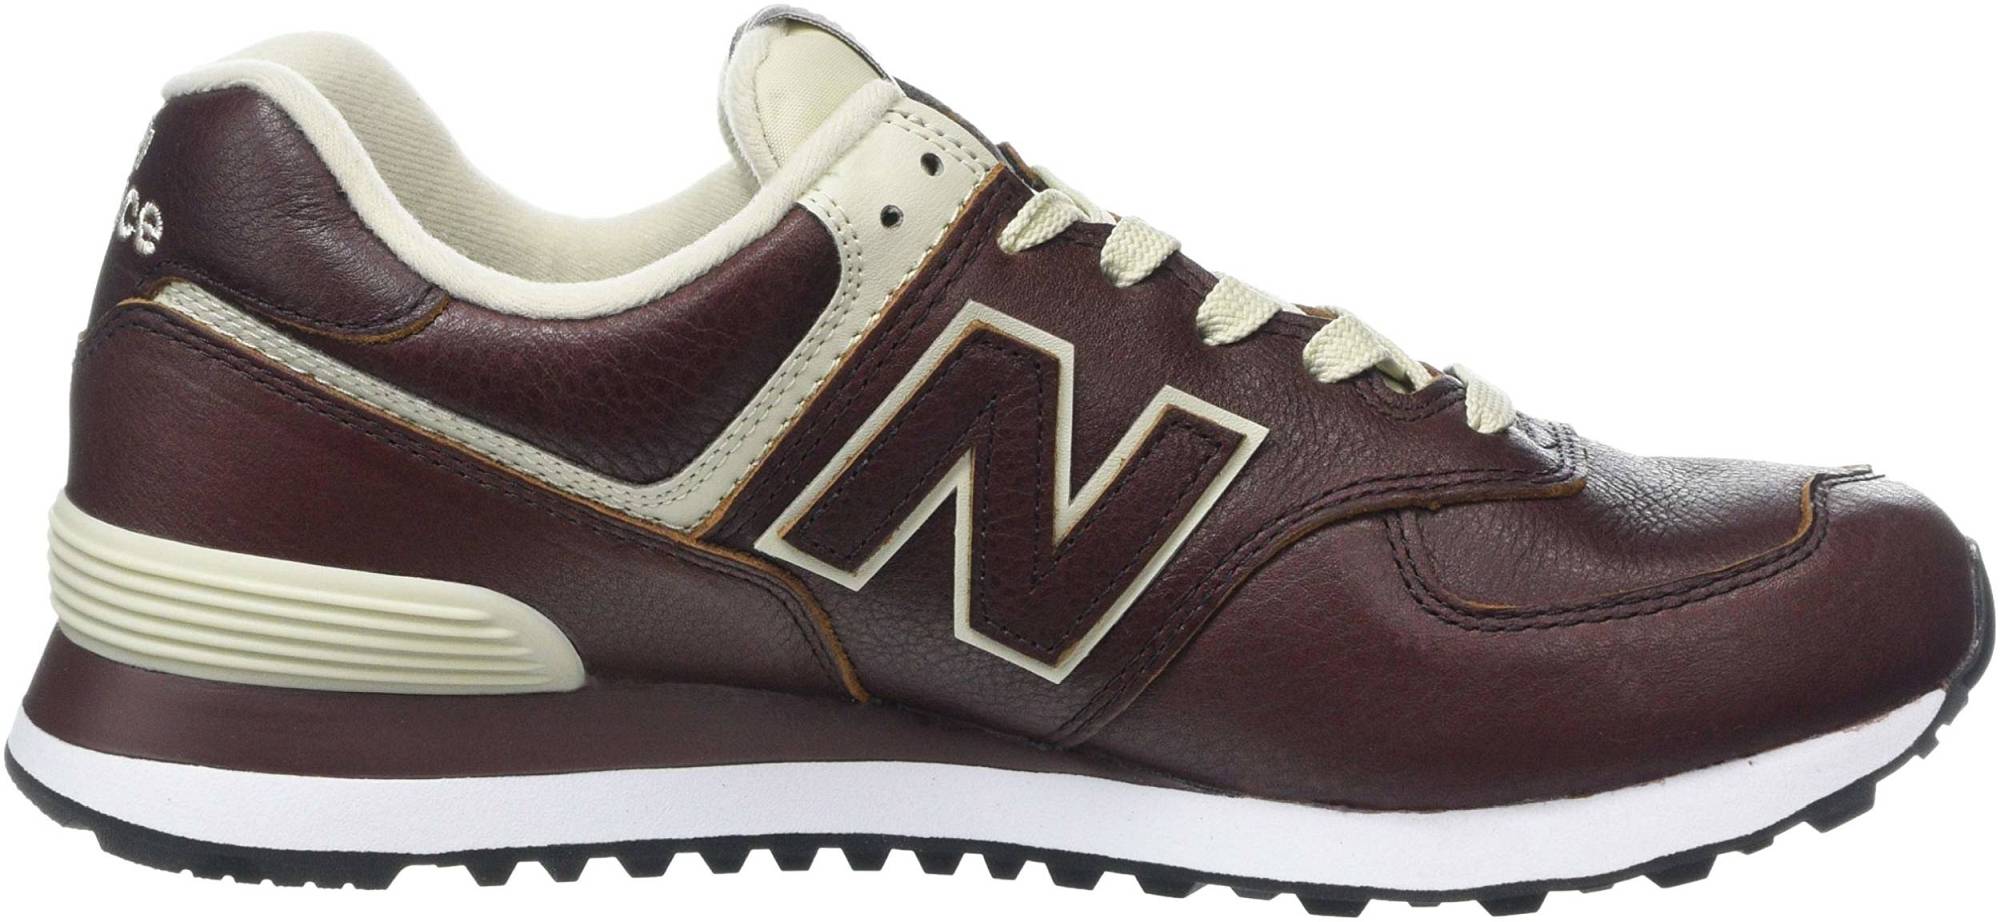 New Balance 574 Leather – Shoes Reviews & Reasons To Buy